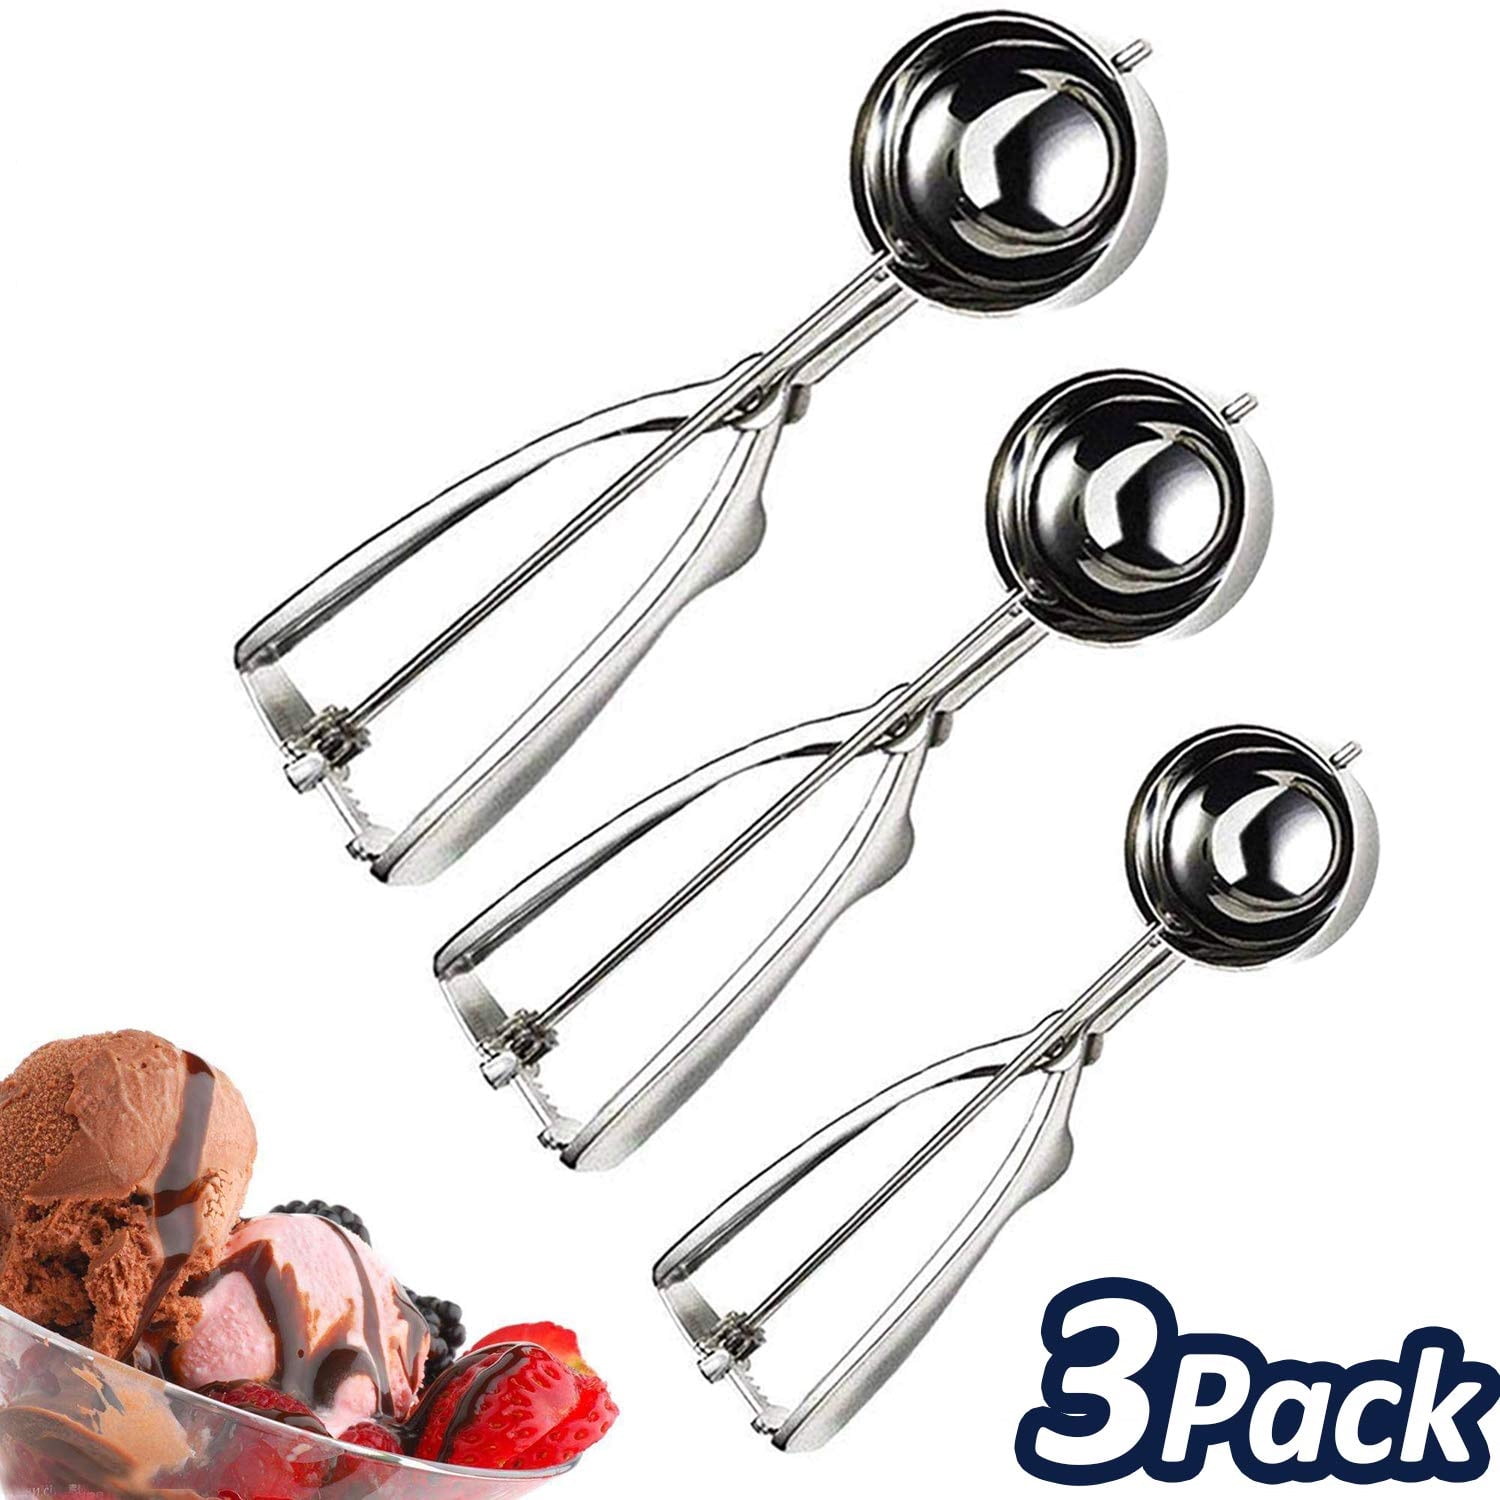 ProfessionaI Heavy Duty Professional Ice Cream Scoop 18/8 Stainless Steel 16# Large Cookie Scoop for Baking Cookie Swedish Meatballs Cupcakes Muffins EVQ Ice Cream Scoops